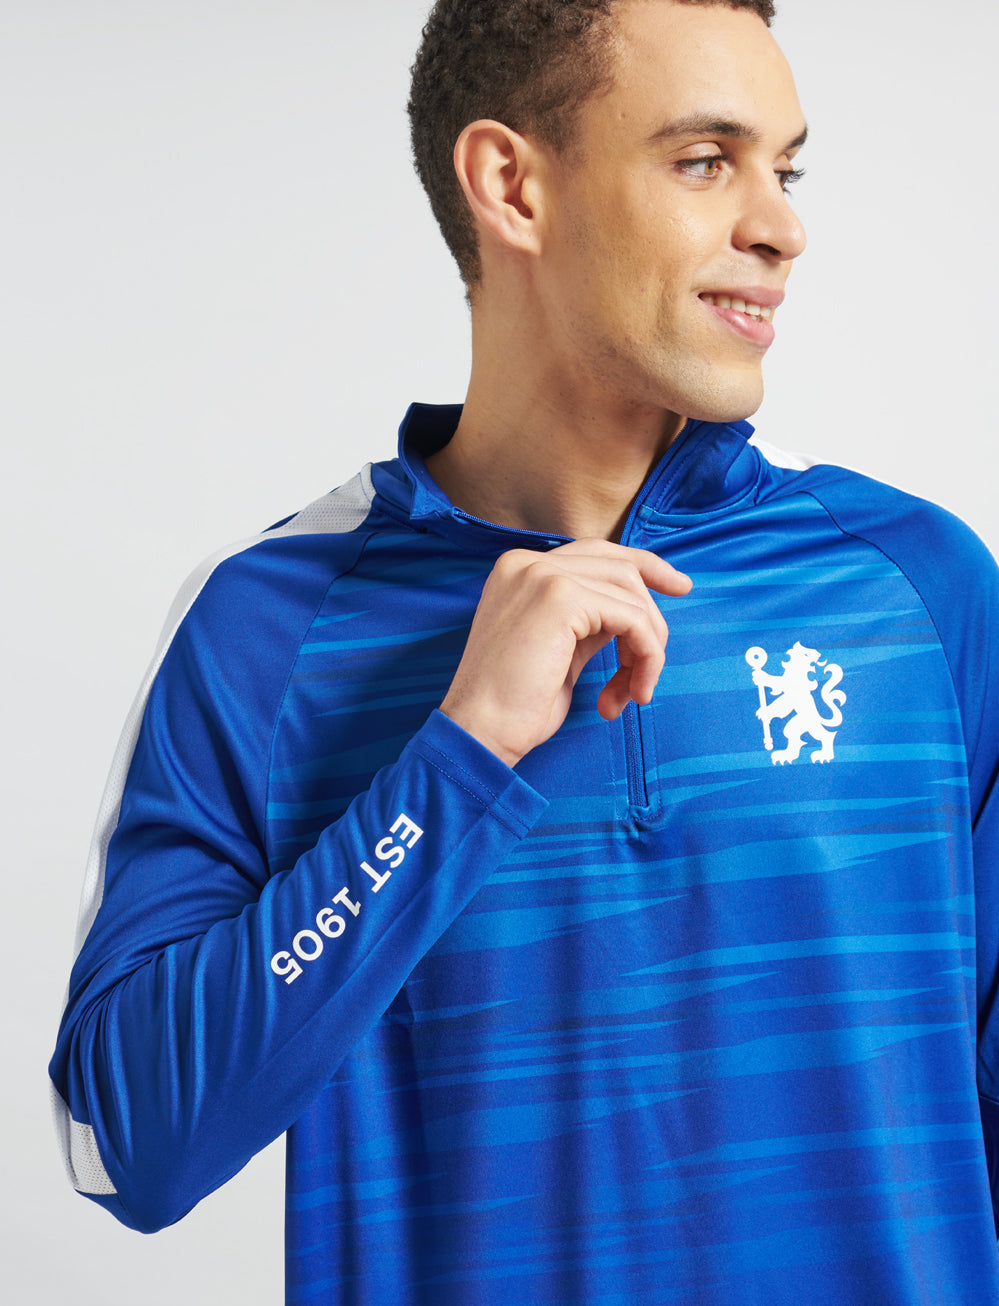 Official Chelsea 1/4 Zip Track Top - Royal Blue - The World Football Store